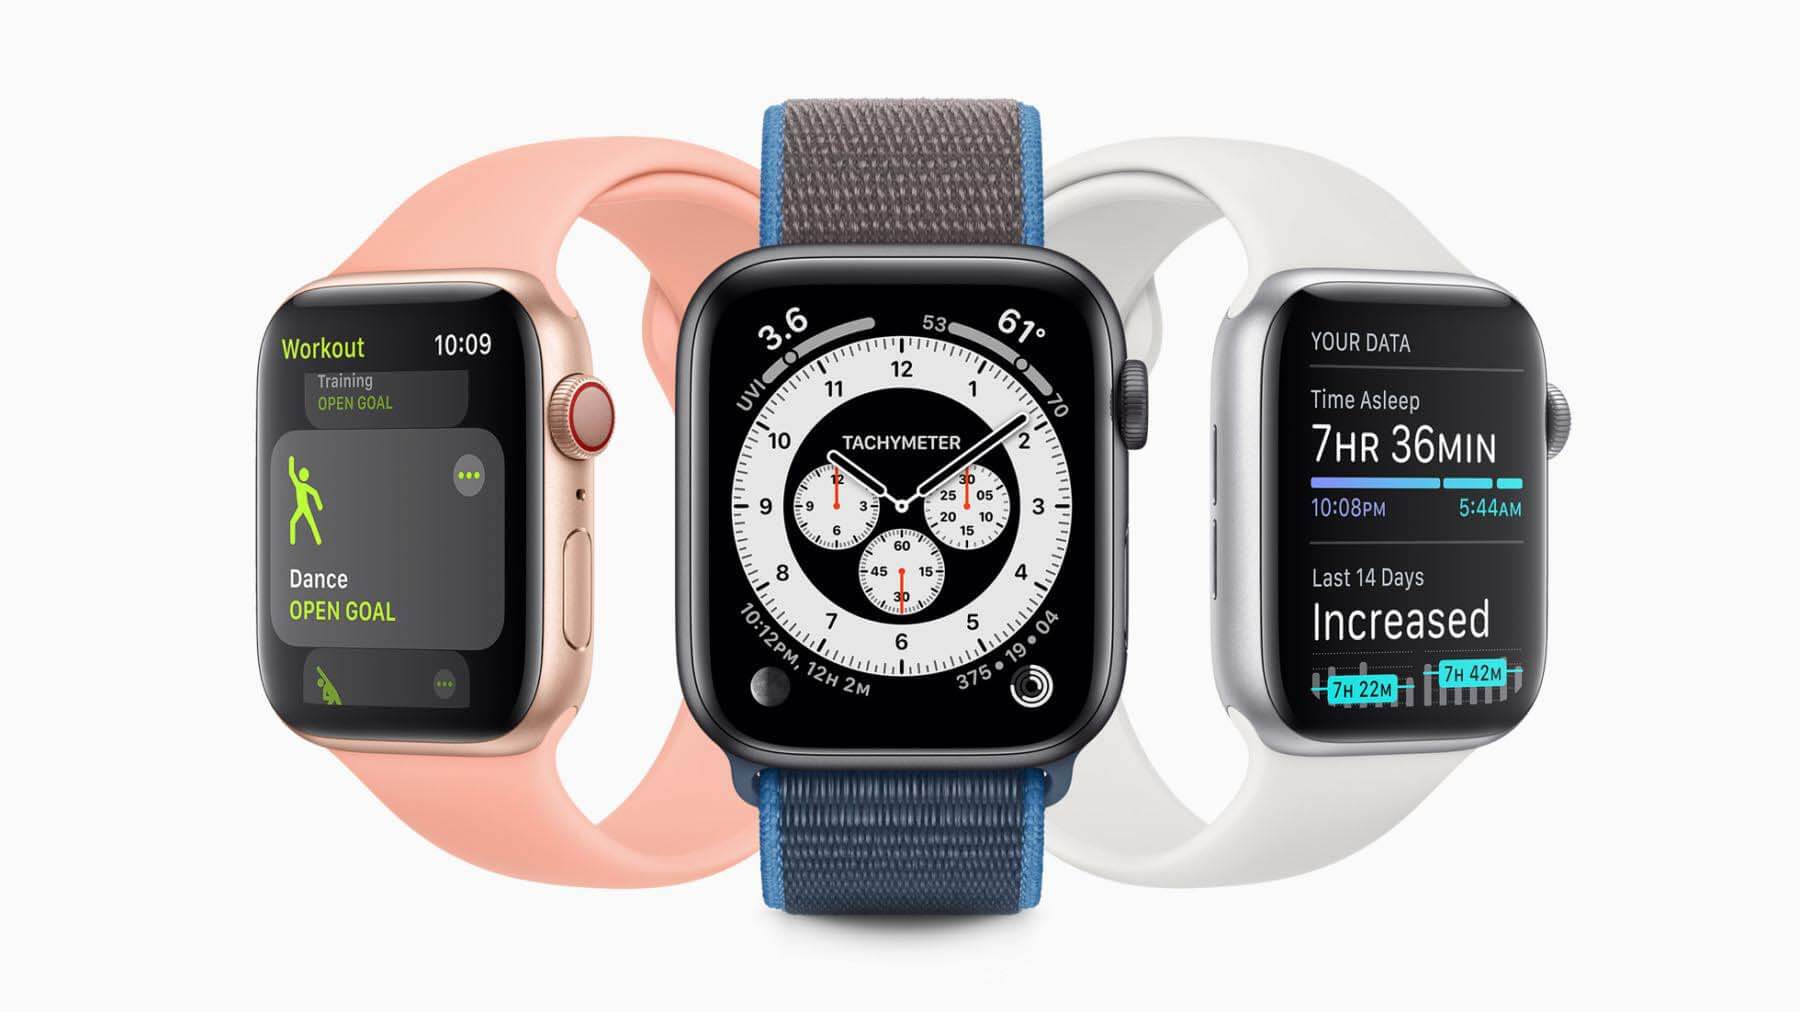 Three Apple Watches, a popular fitness tracker in 2020